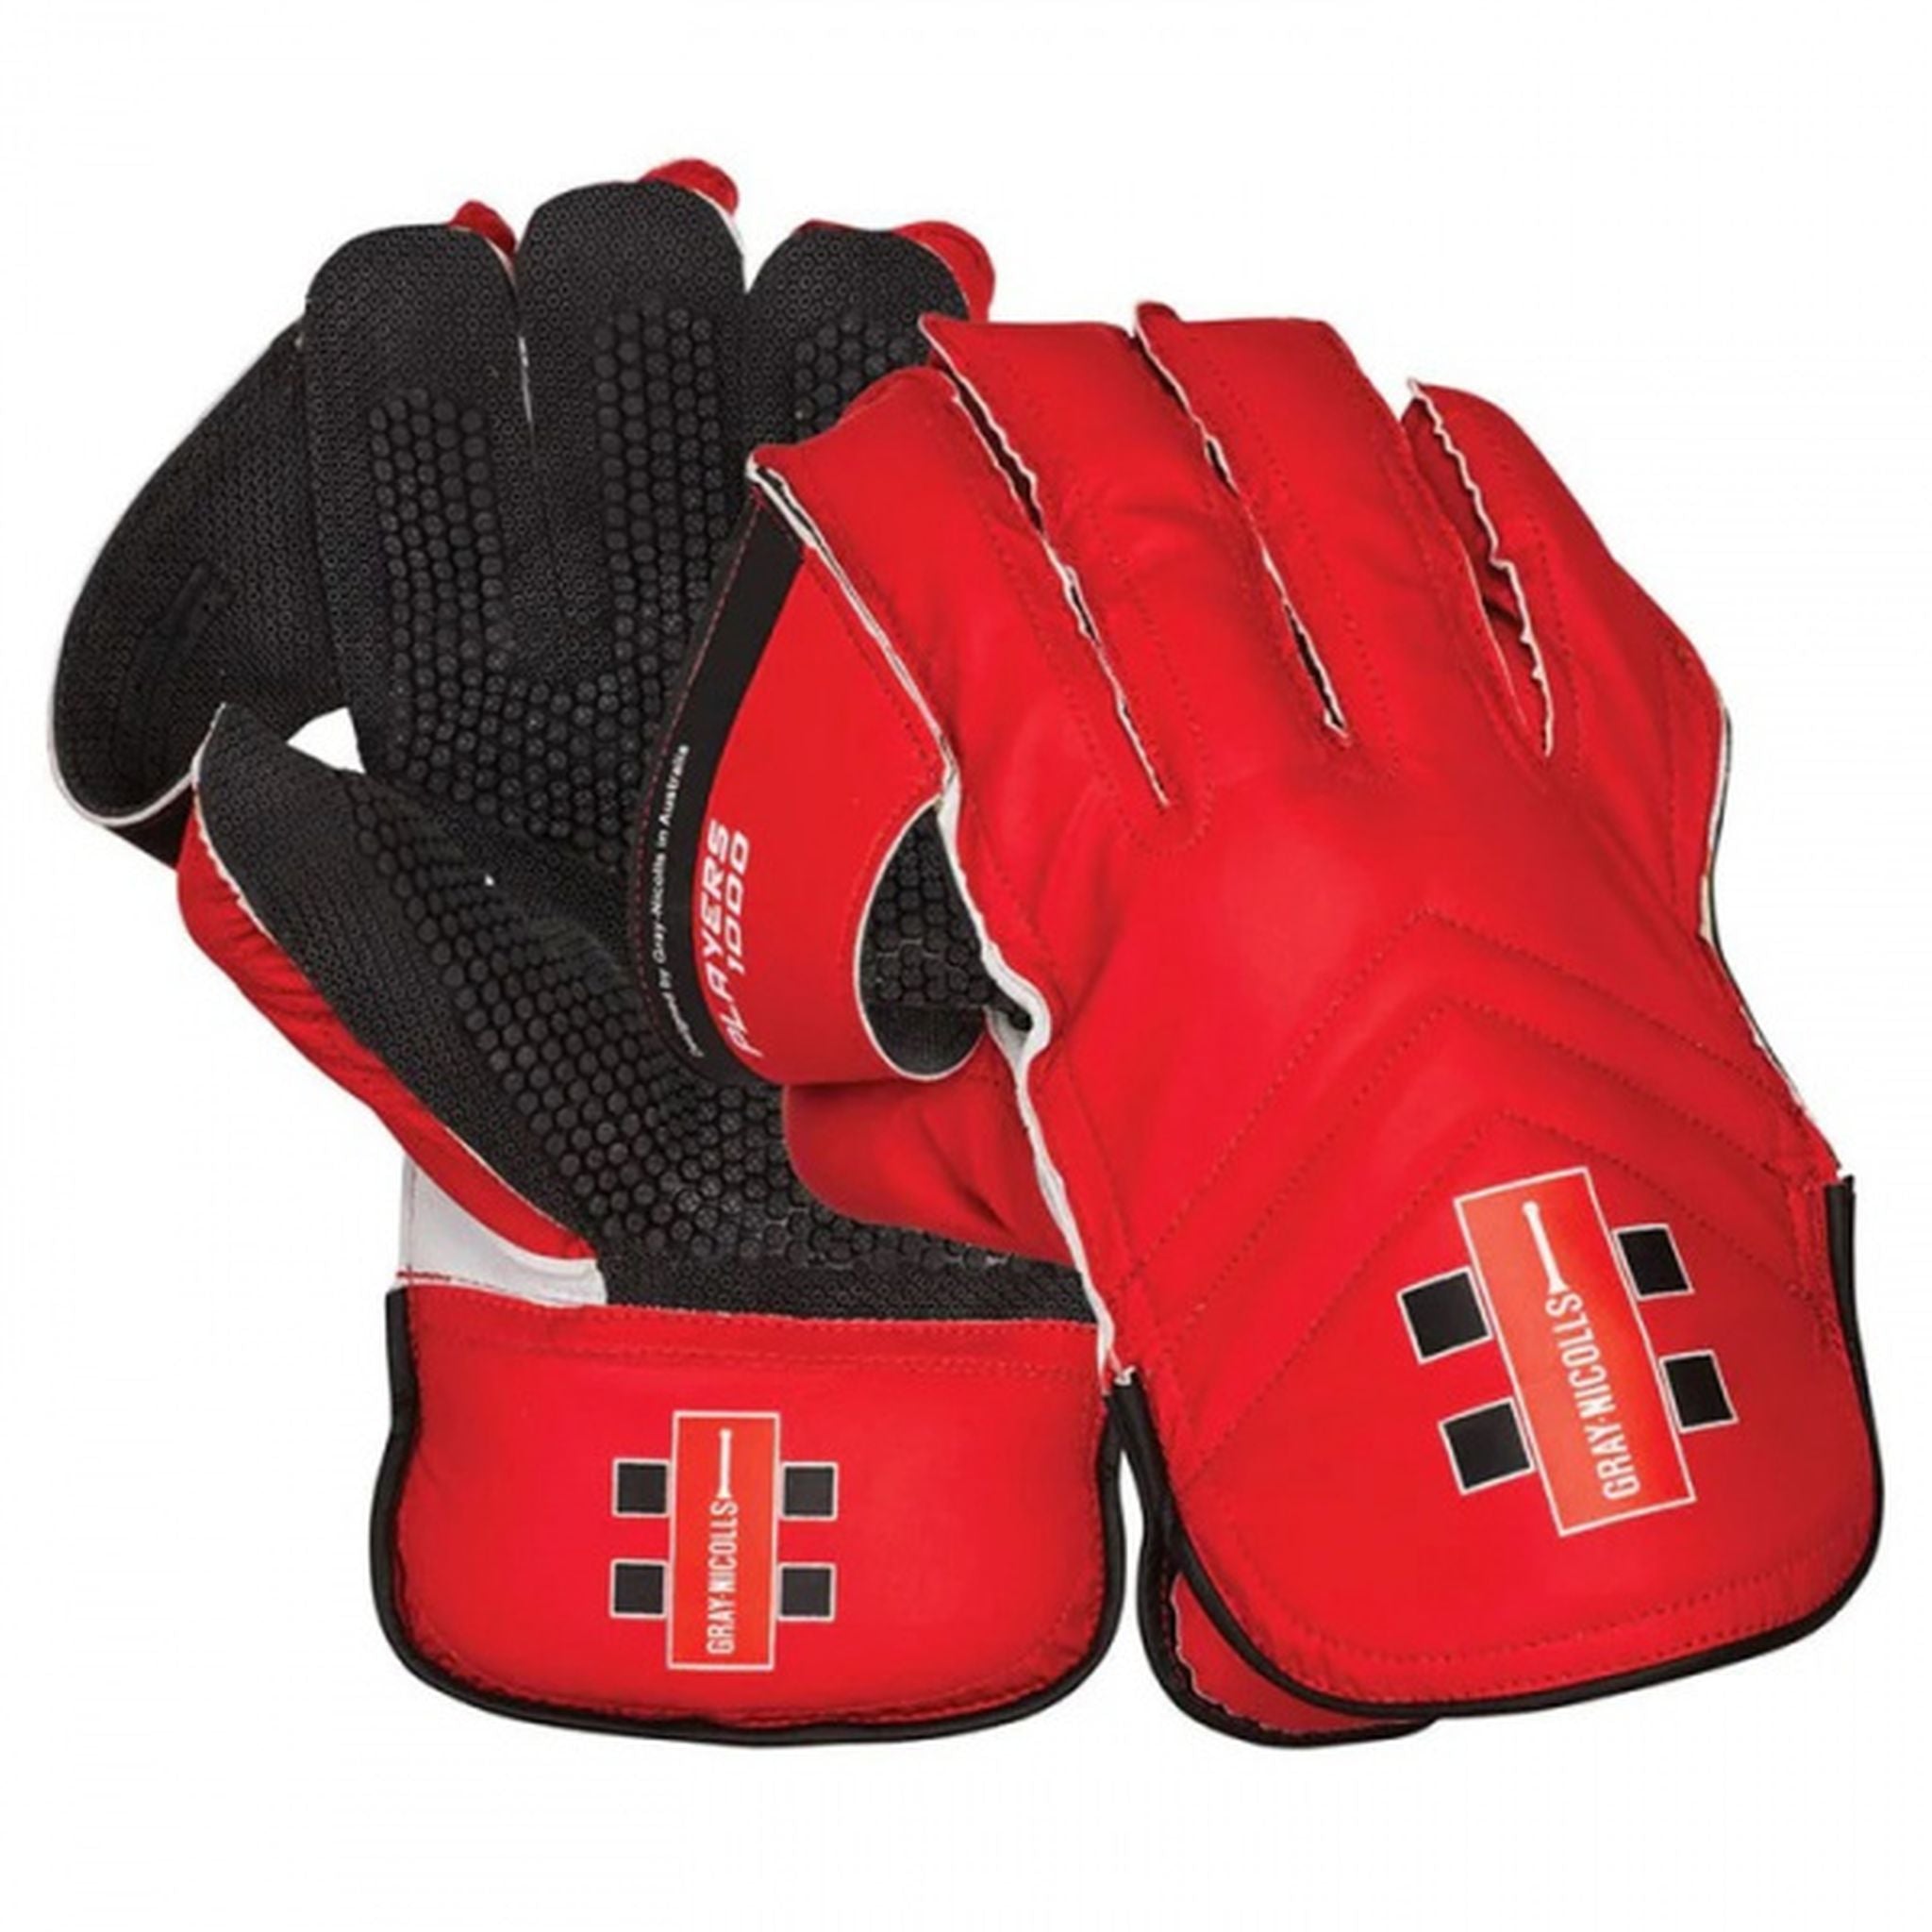 Gray-Nicolls Players 1000 Youth Wicket Keeping Gloves